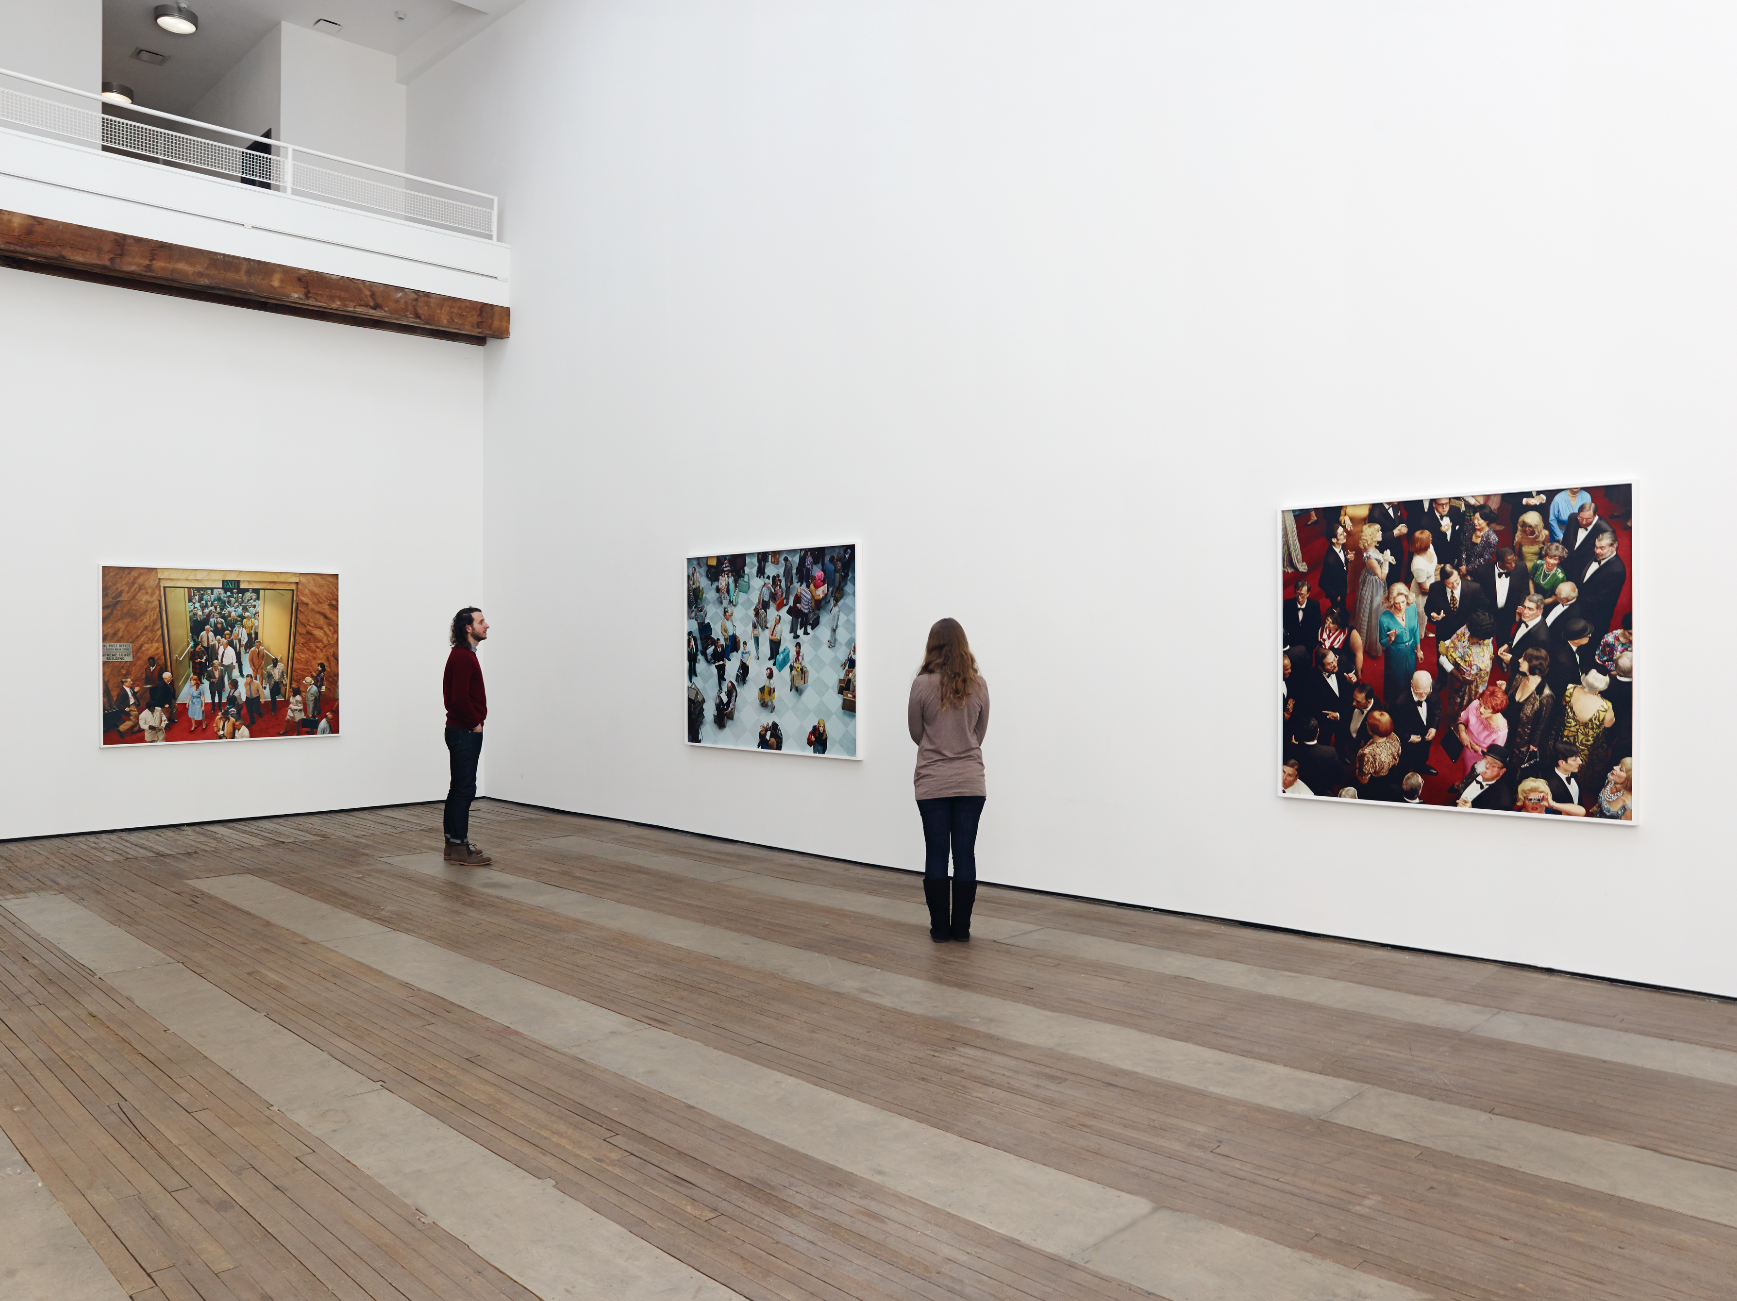   Face in the Crowd  Installation View: Lehmann Maupin, New York (Chrystie Street), 2014.  